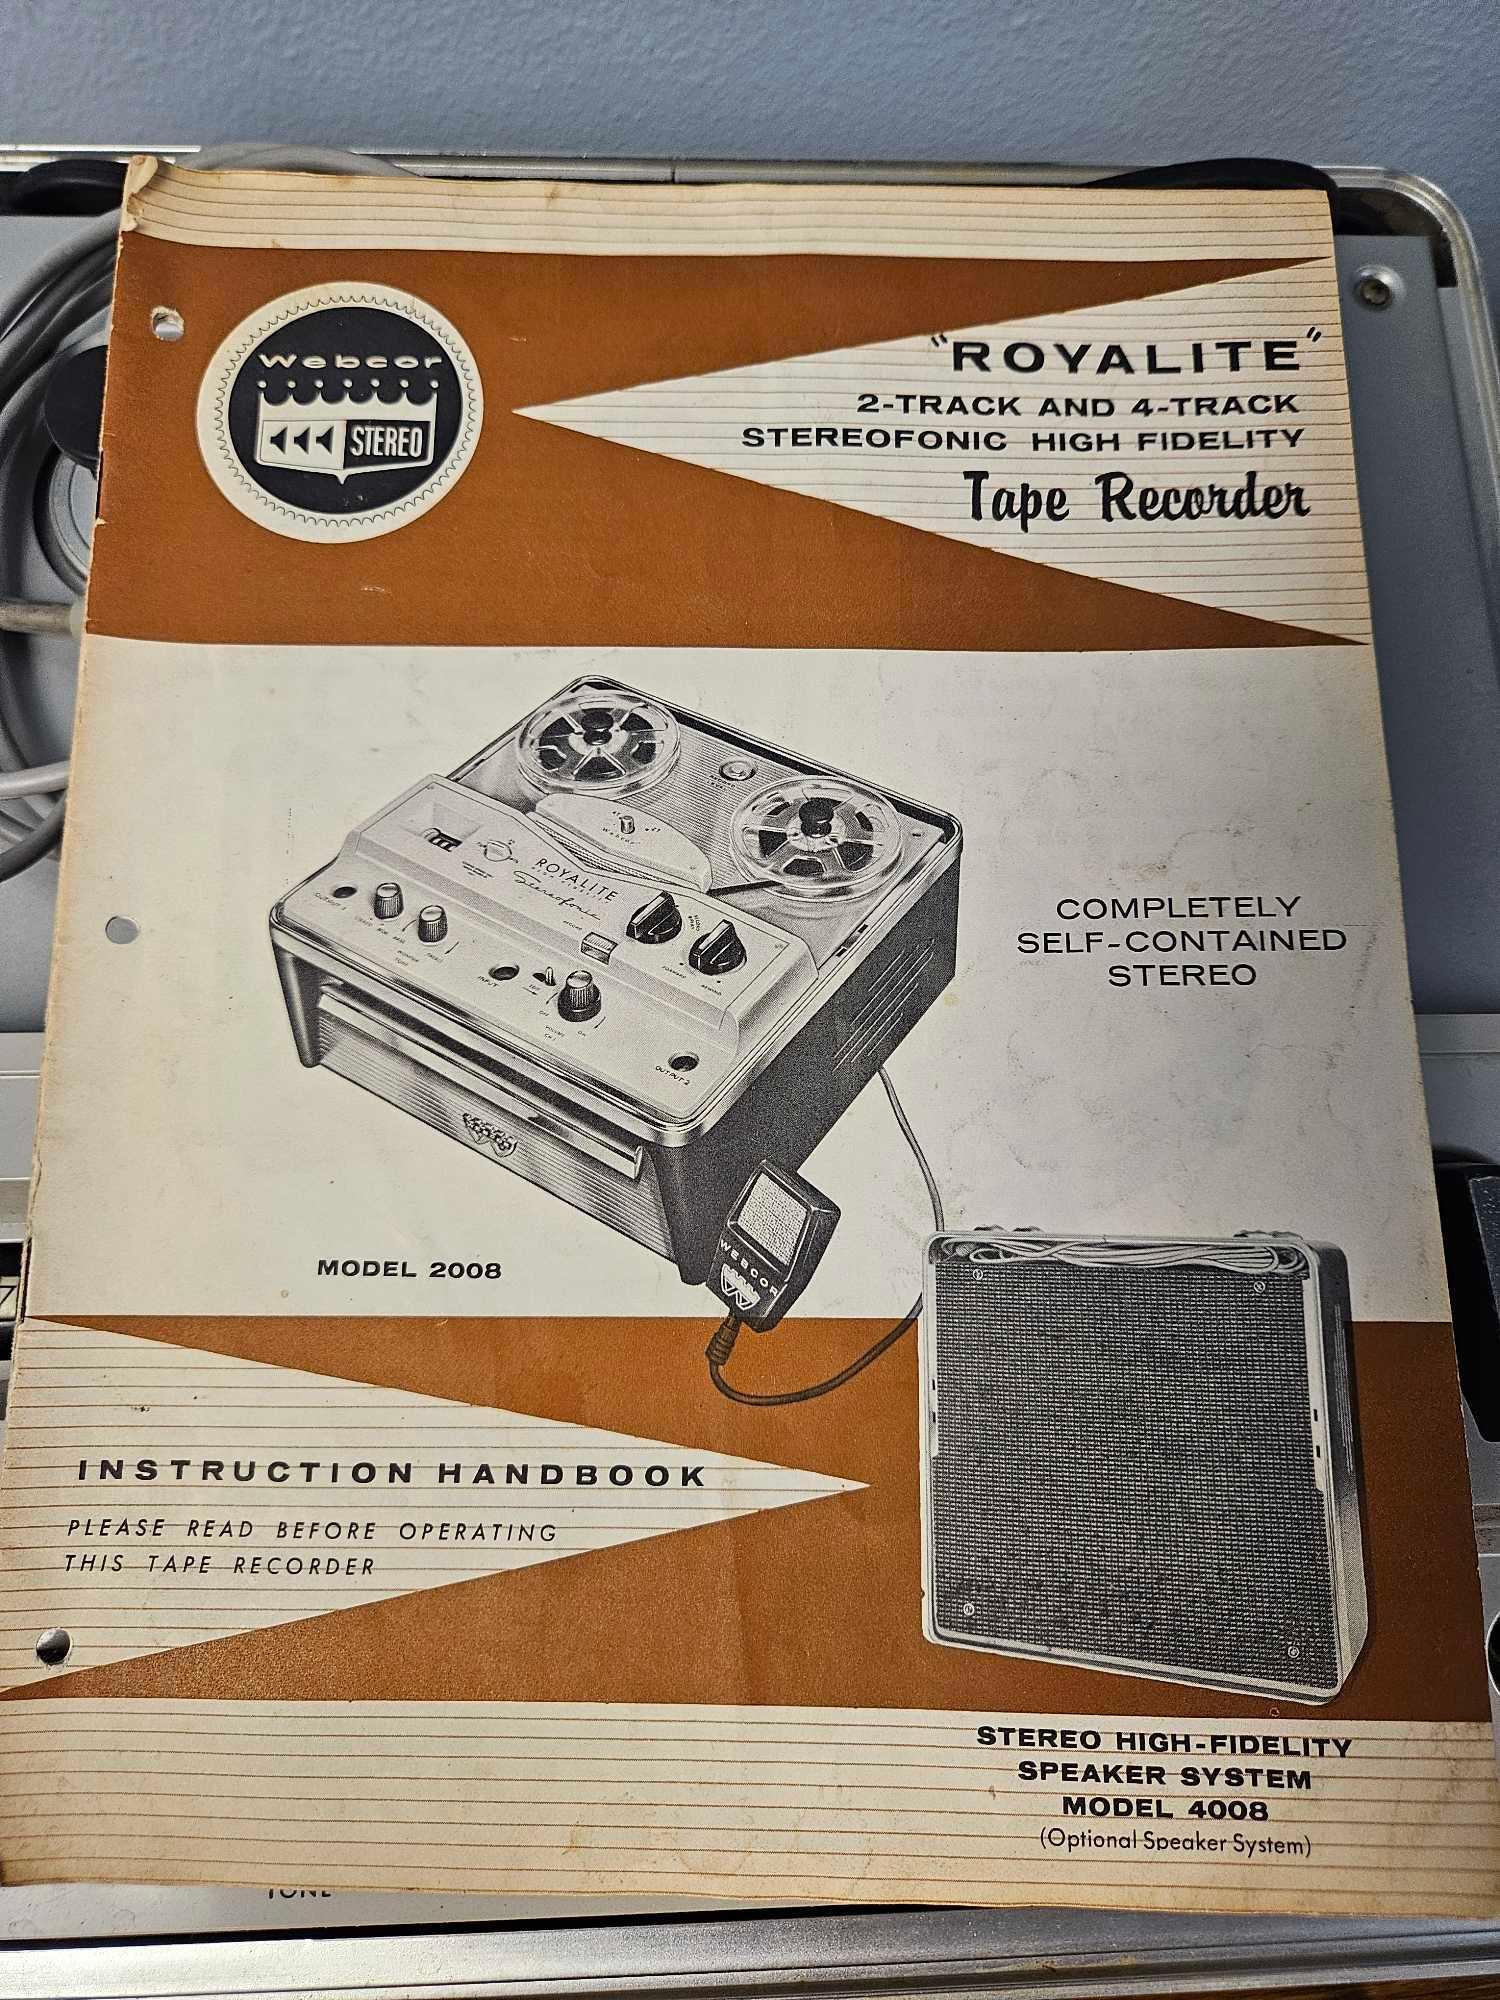 VINTAGE ROYALITE 2 and 4 Track TAPE RECORDER, STEREOPHONIC HIGH FIDELITY!